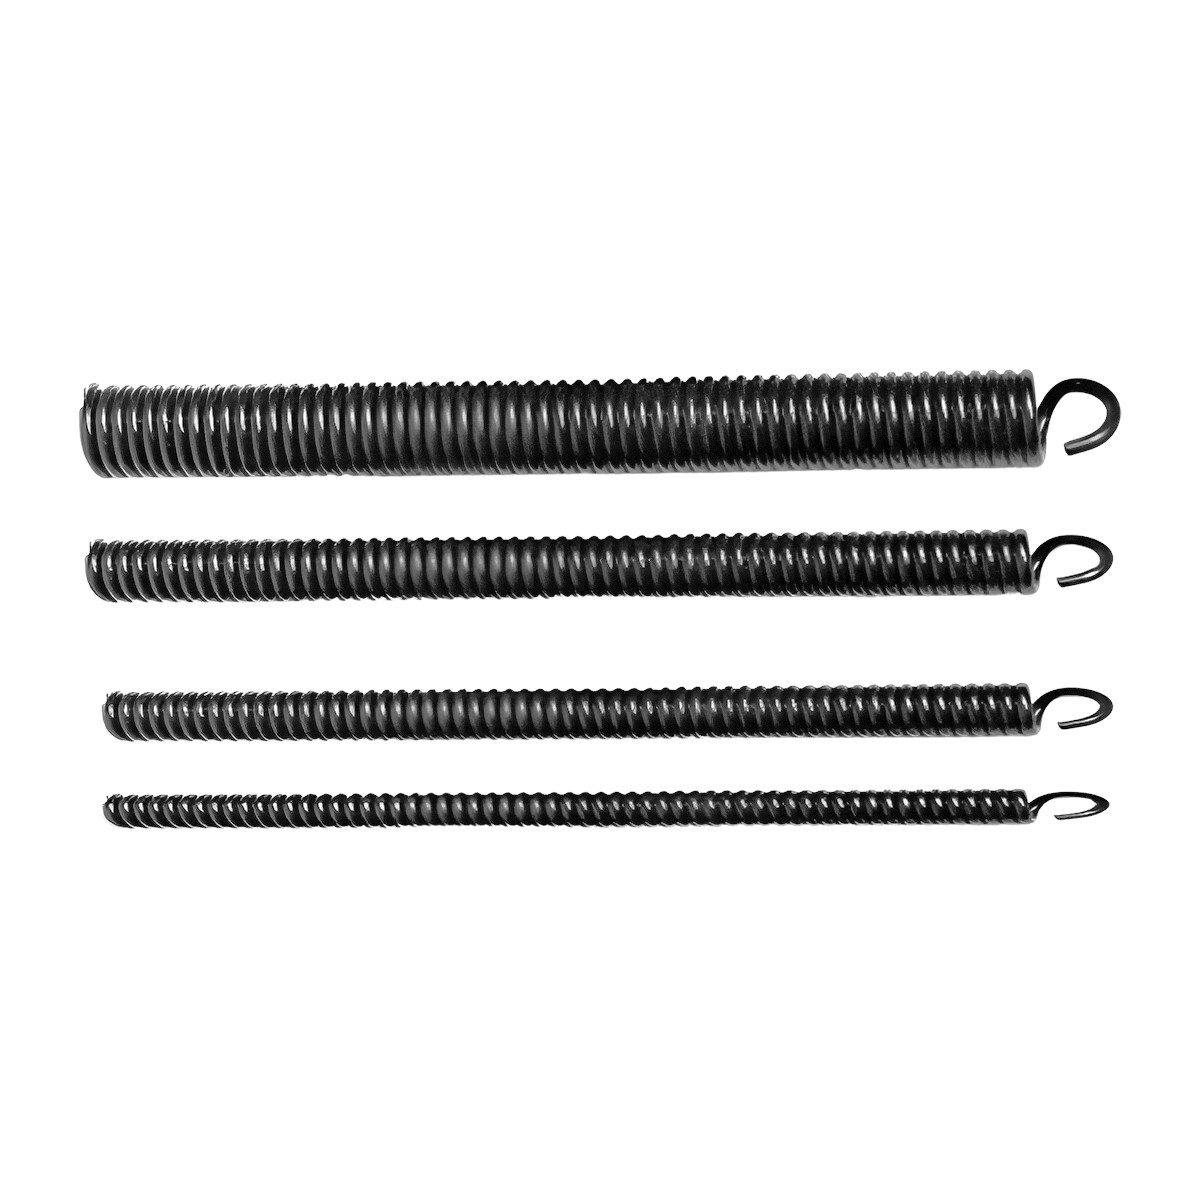 SPRINGS FOR ELECTRICIANS